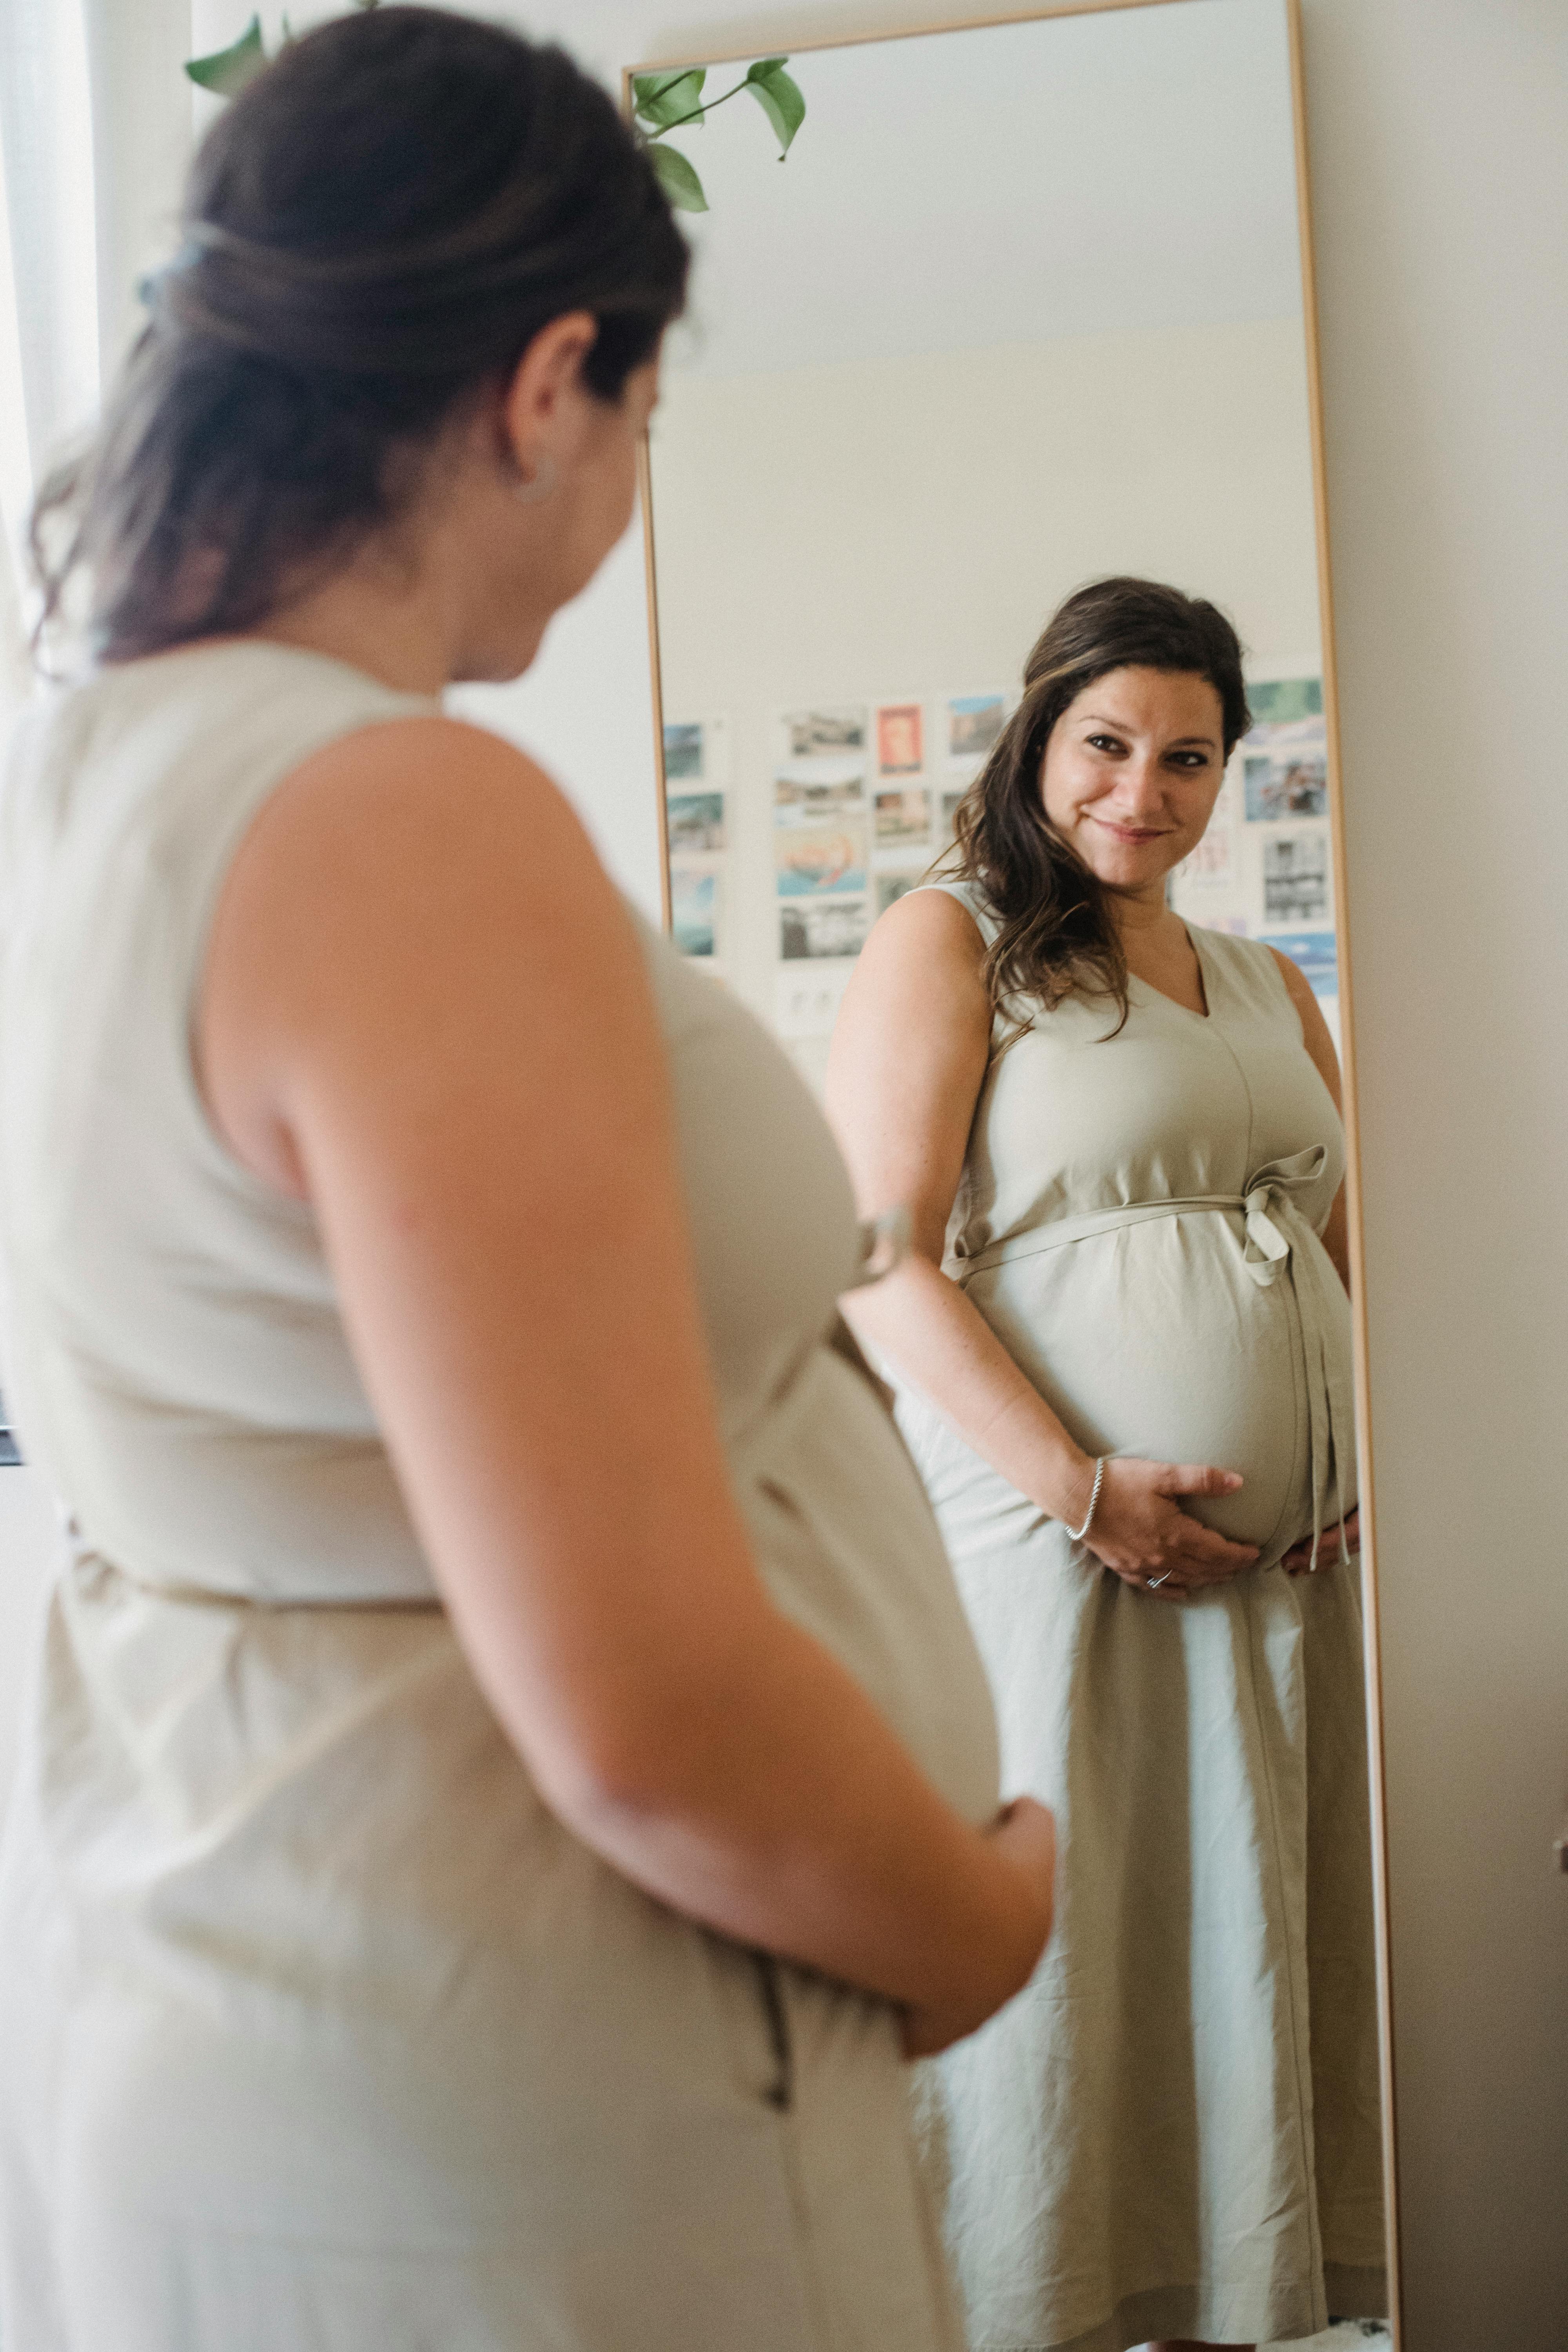 A happy pregnant woman looking at herself in a mirror | Source: Pexels